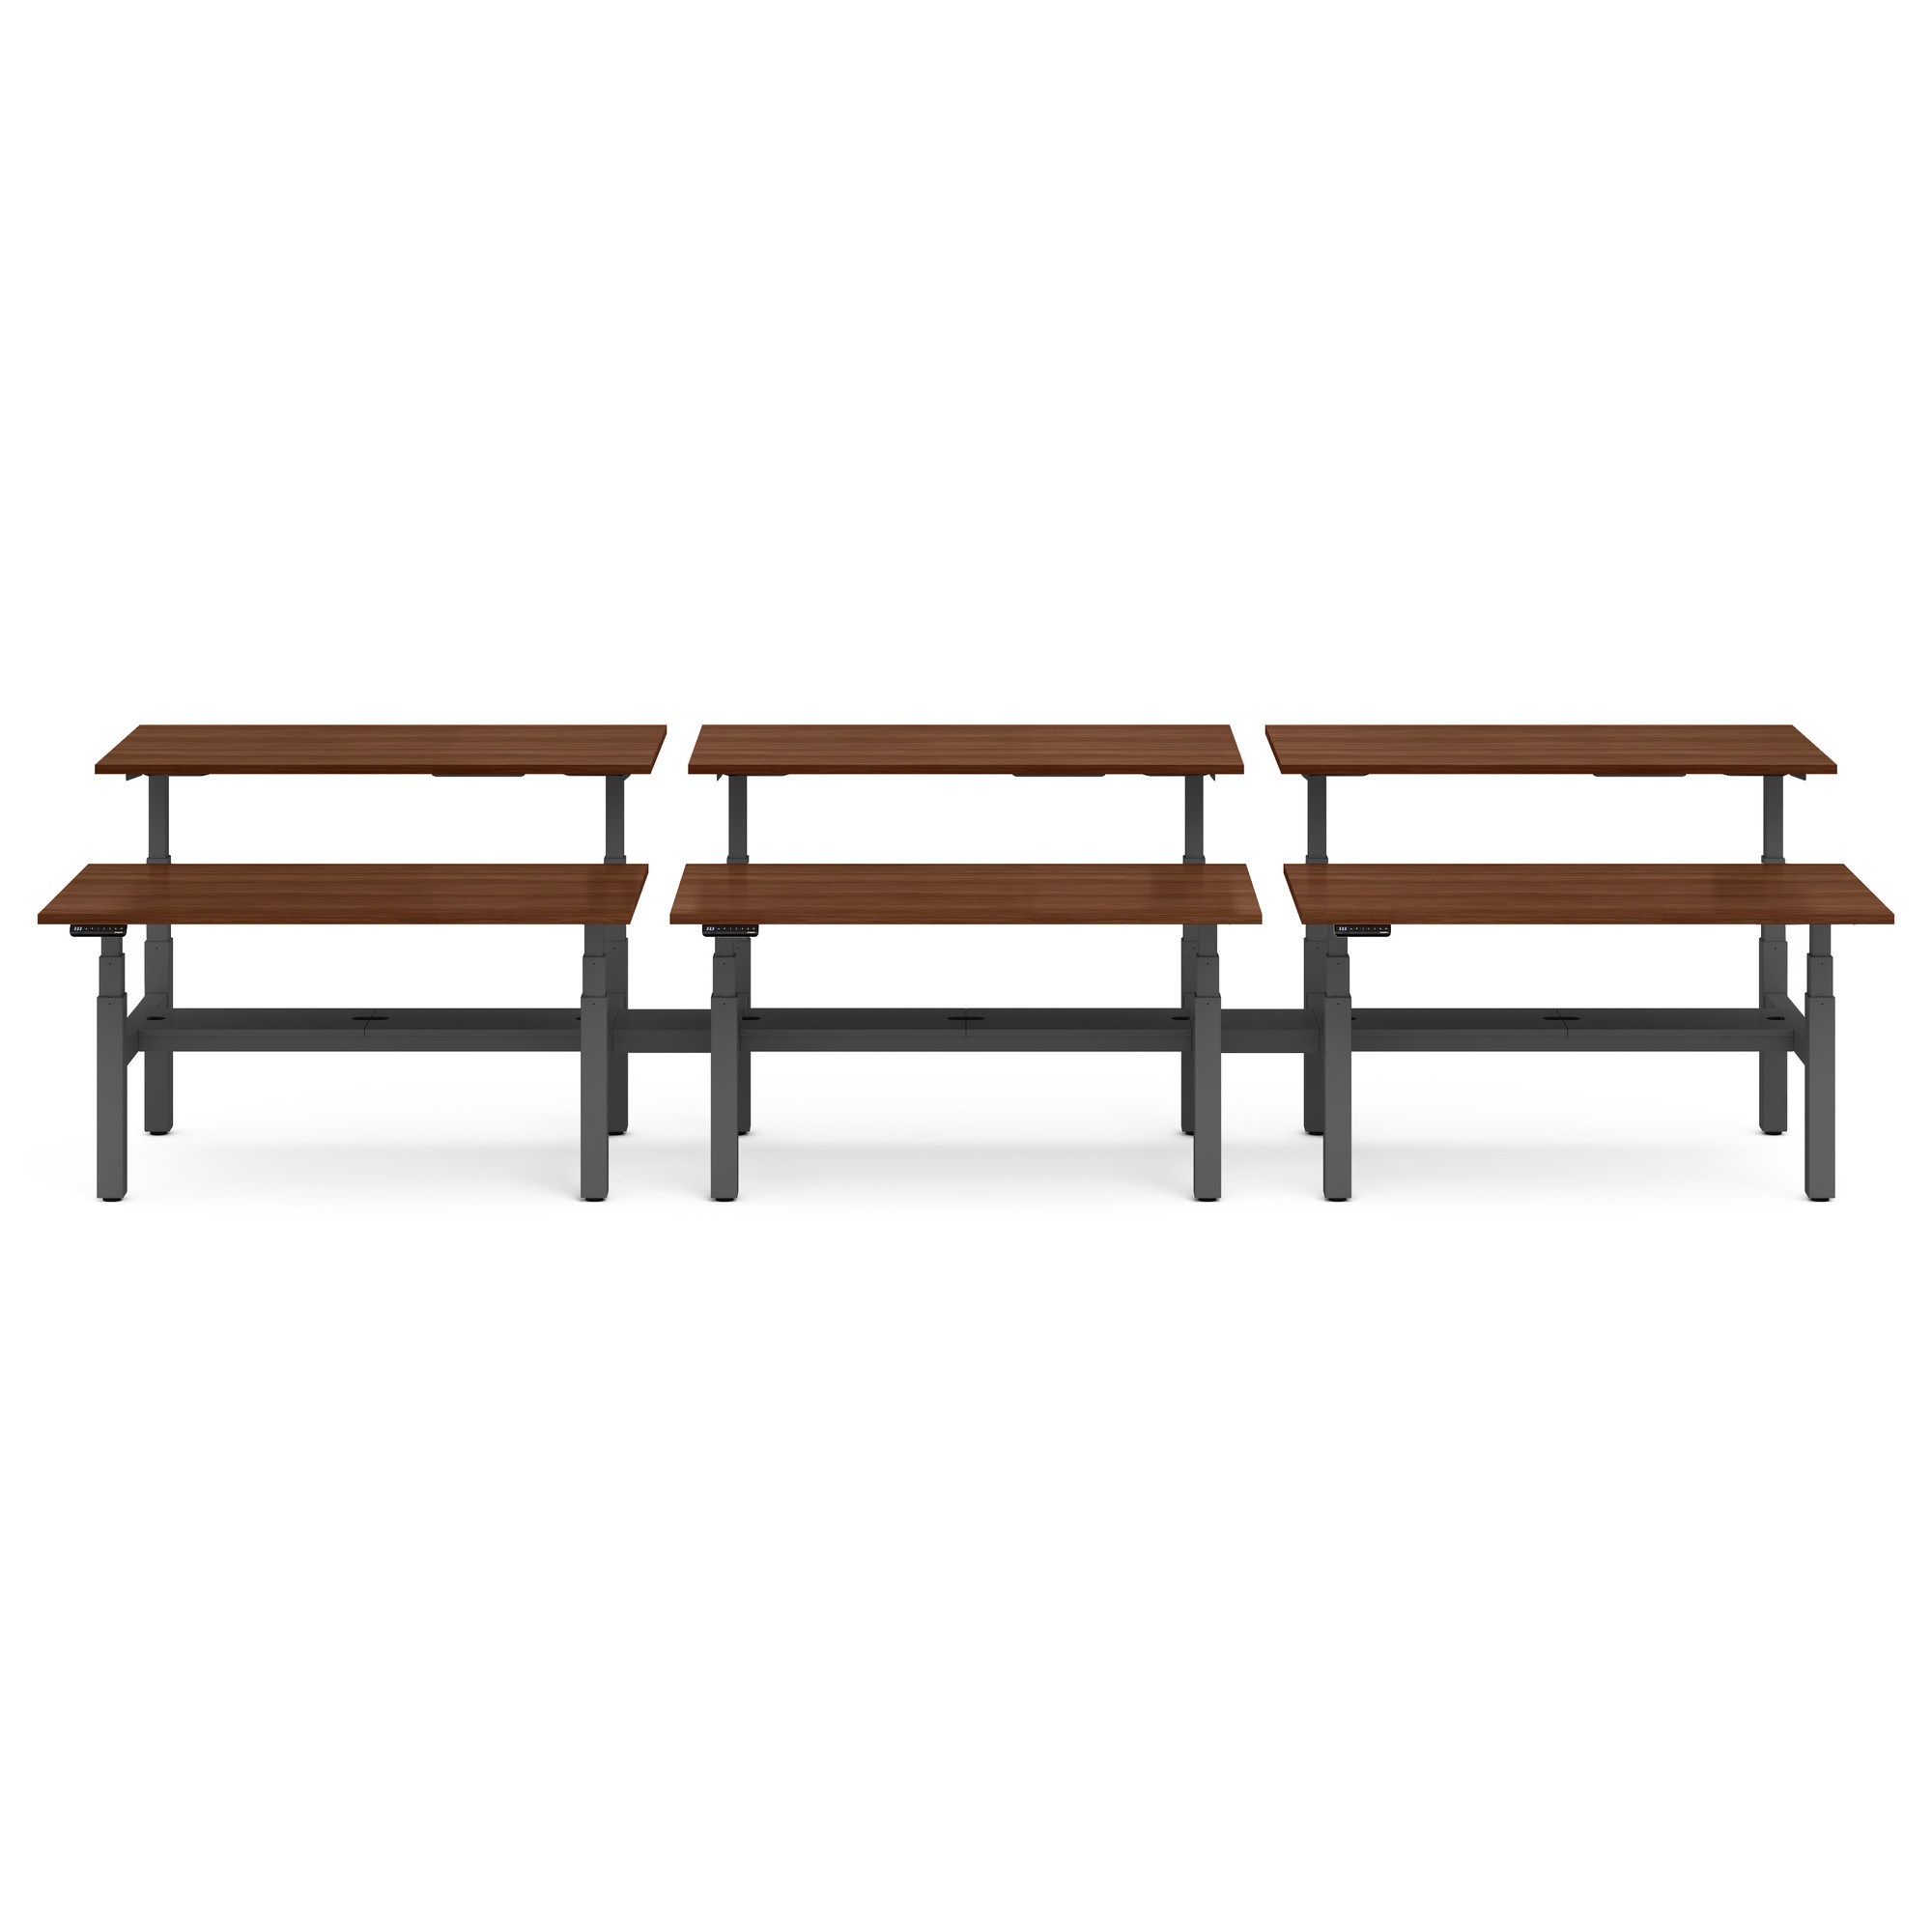 Series L Adjustable Height Double Desk for 6, Walnut, 60", Charcoal Legs,Walnut,hi-res